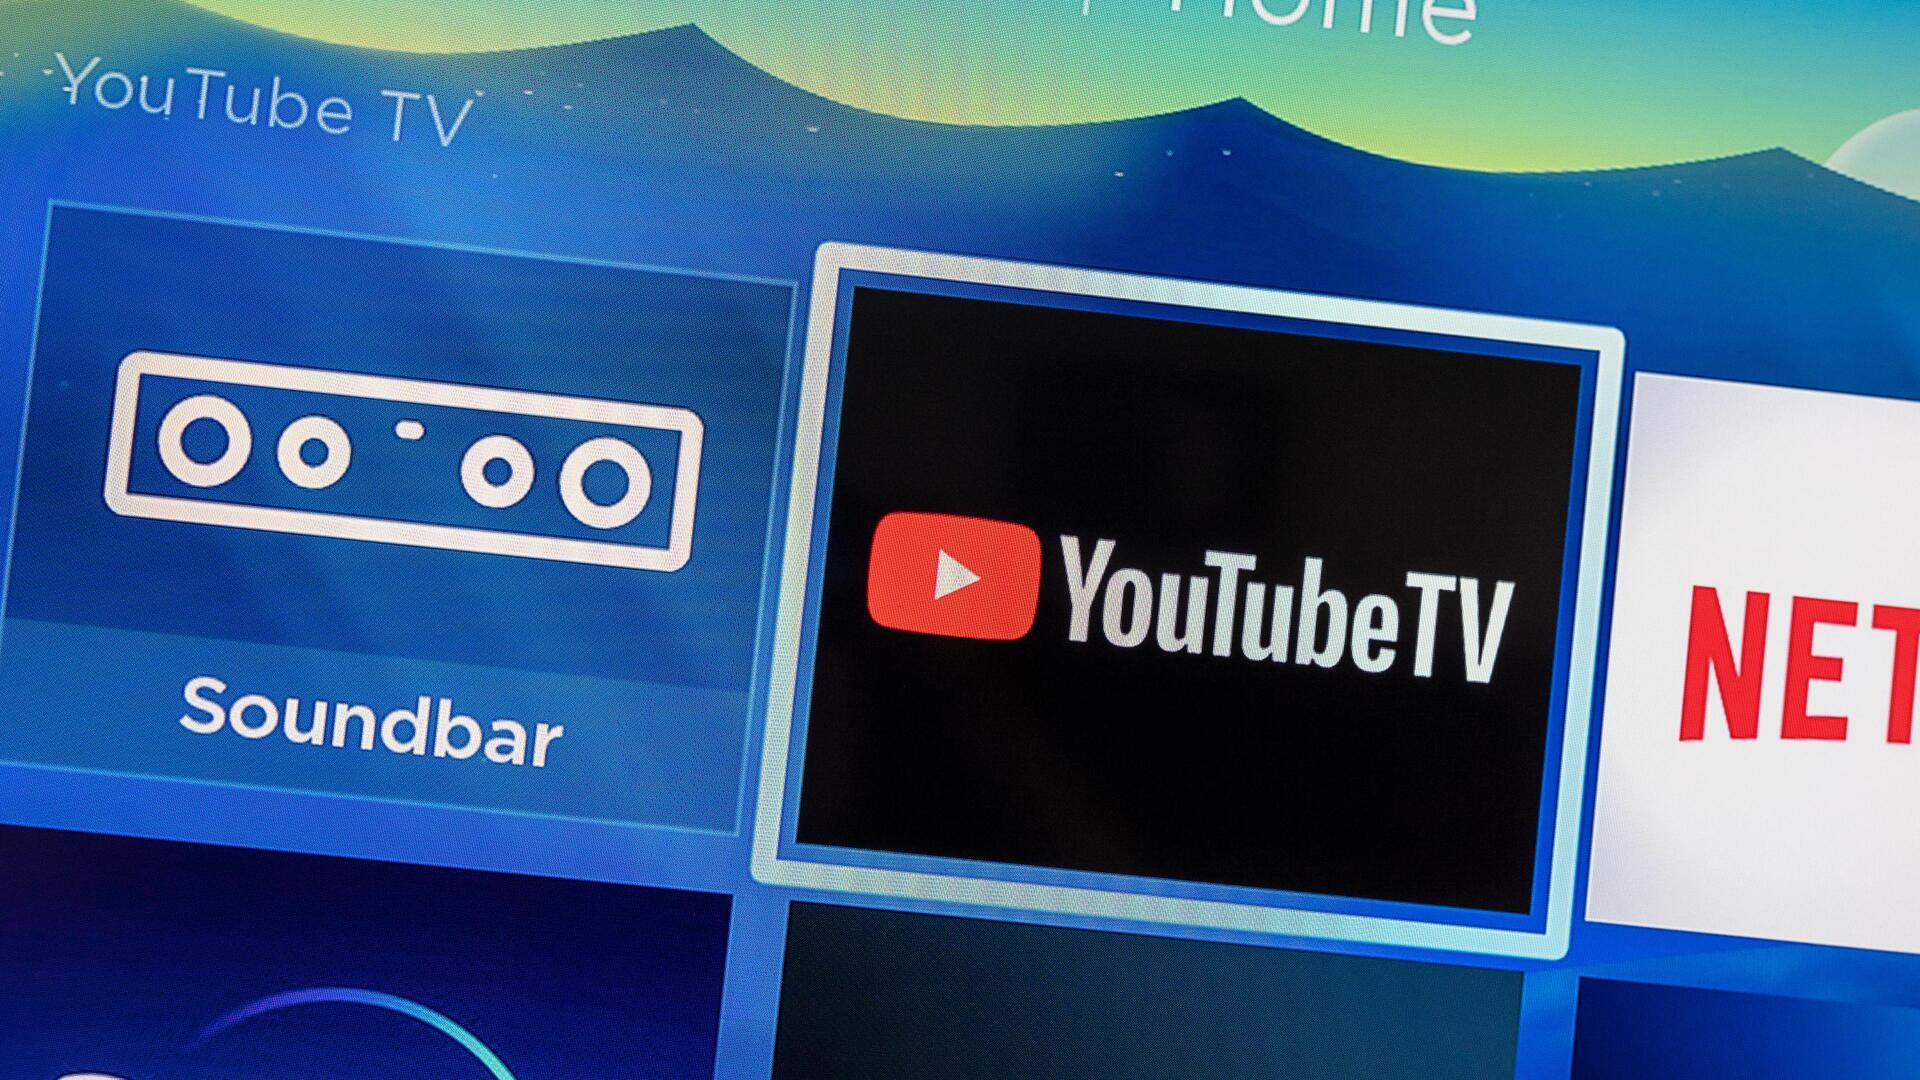 YouTube TV launches 'Last Channel Shortcut': How it works